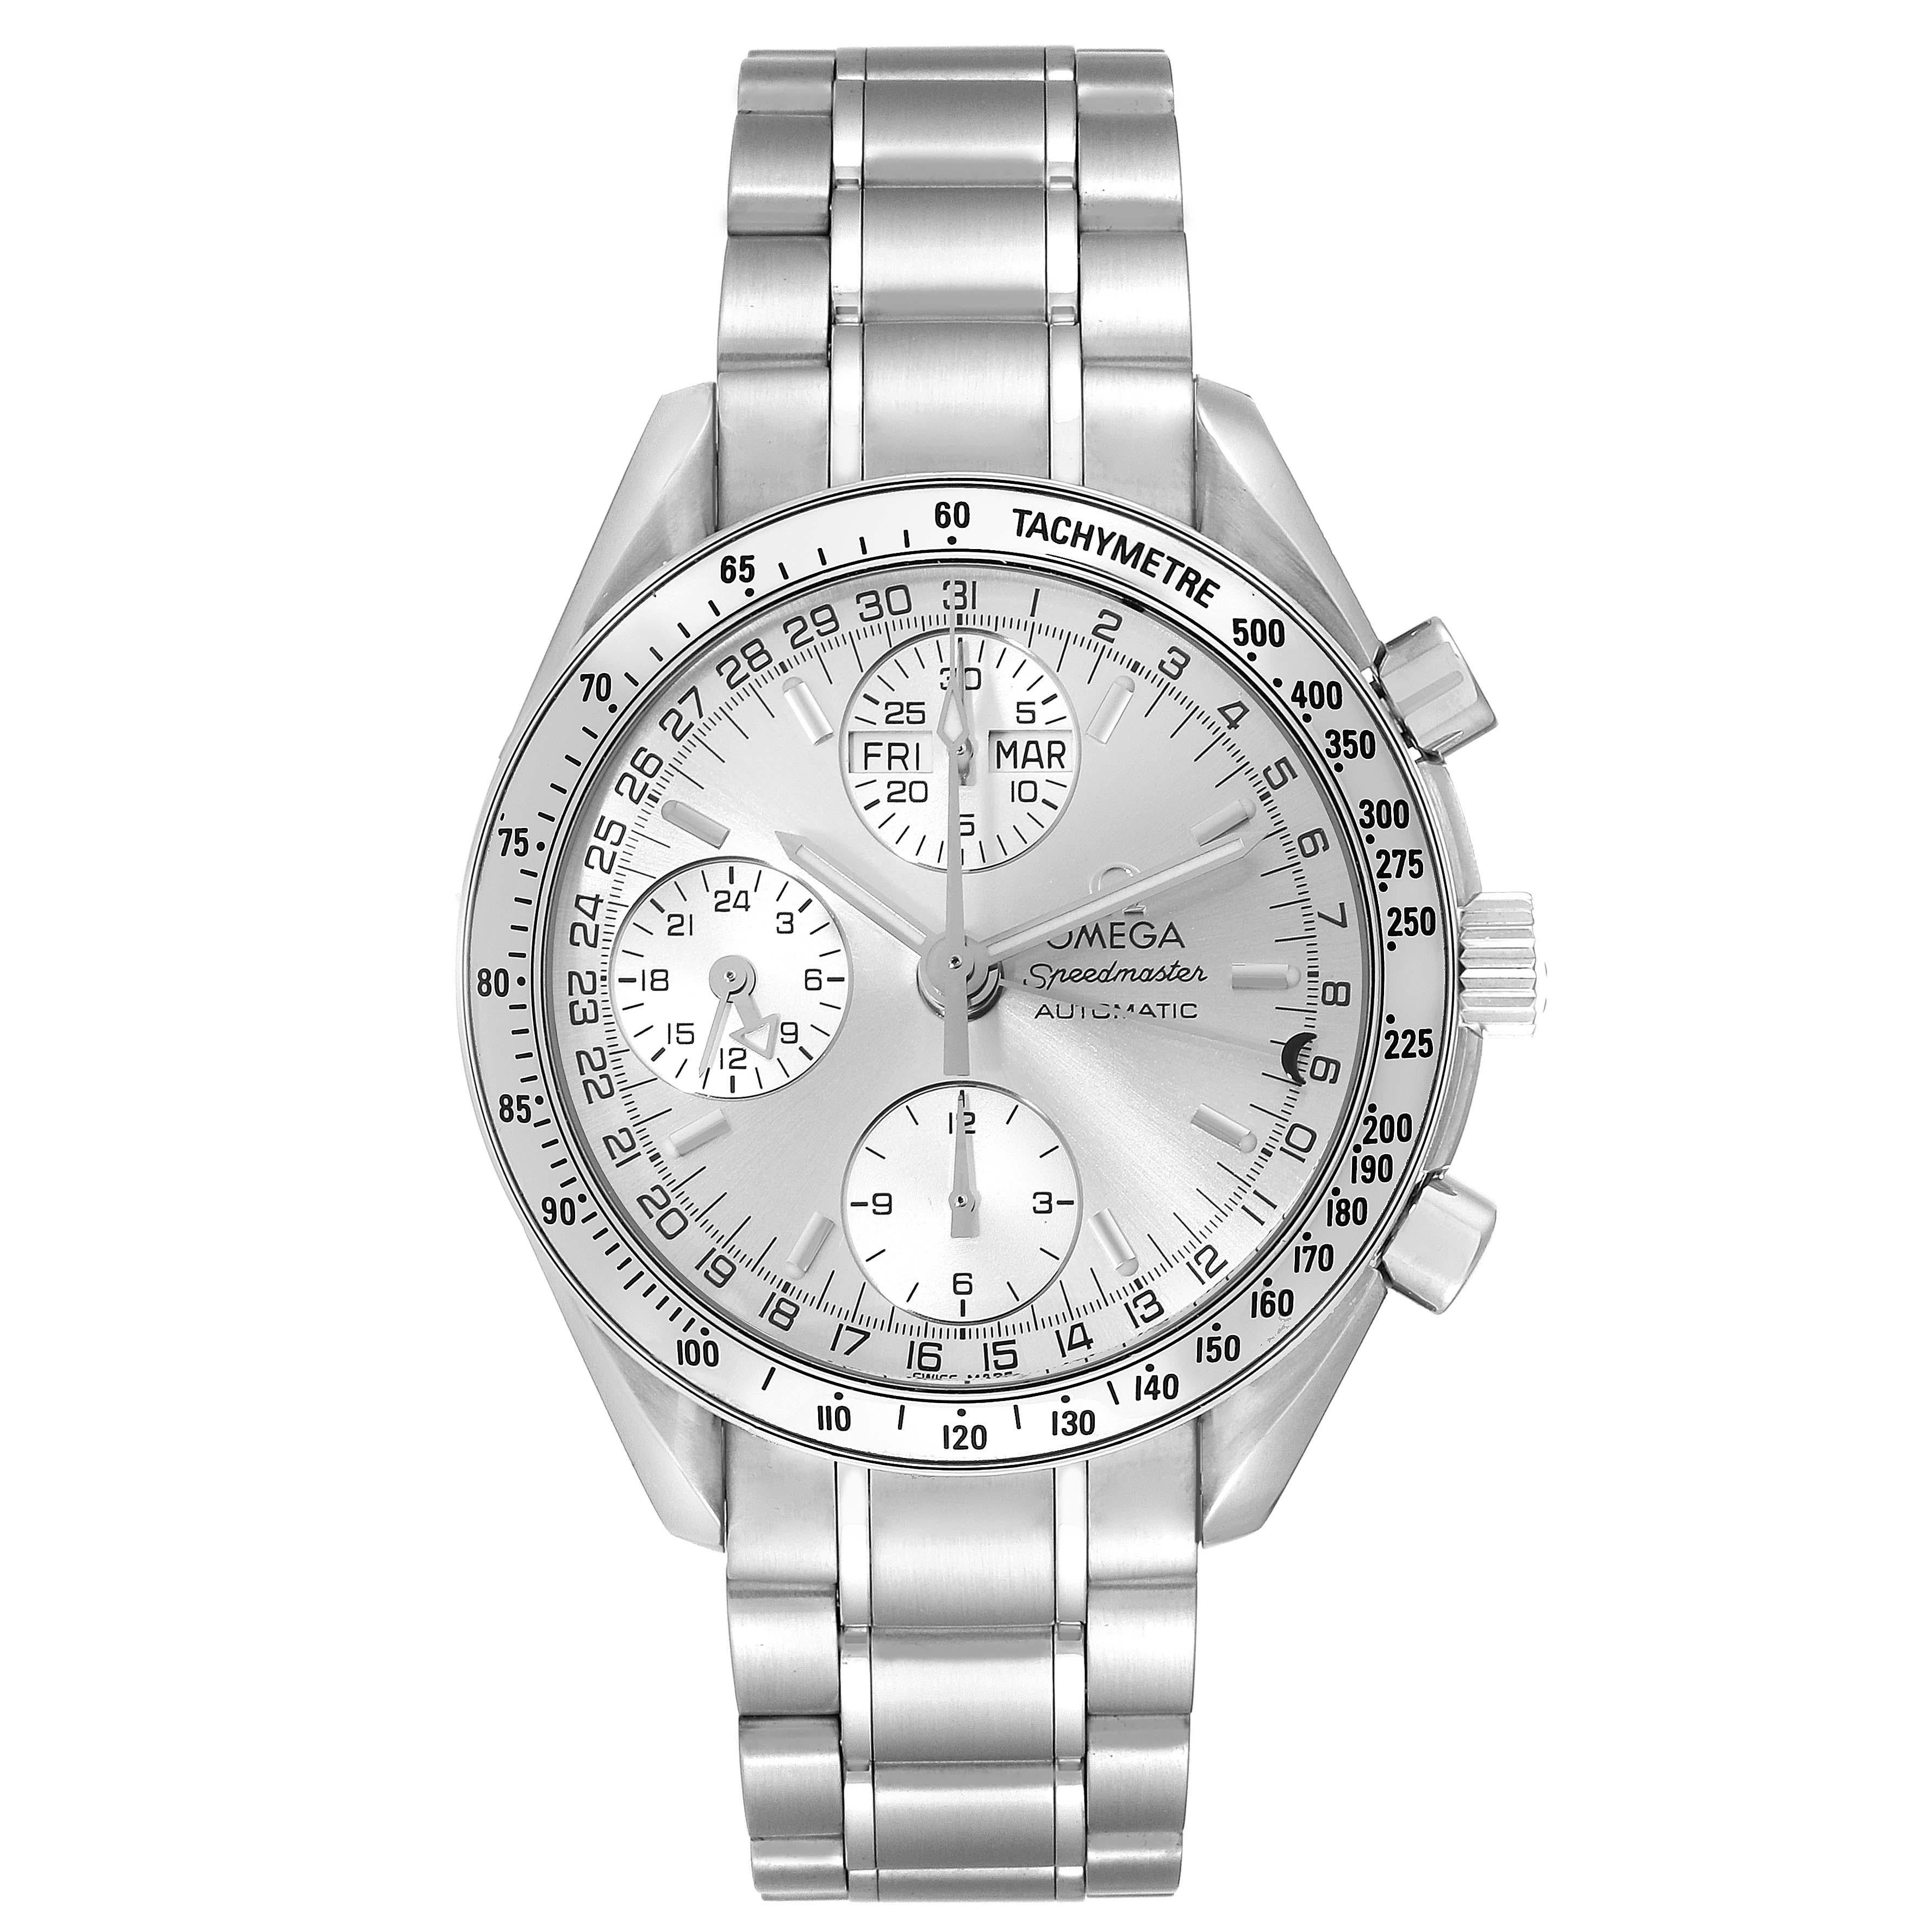 Omega Speedmaster Day Date Chronograph Steel Mens Watch 3523.30.00. Automatic self-winding chronograph movement. Day and month indications. Stainless steel round case 39.0 mm in diameter. Stainless steel bezel with tachymeter scale.